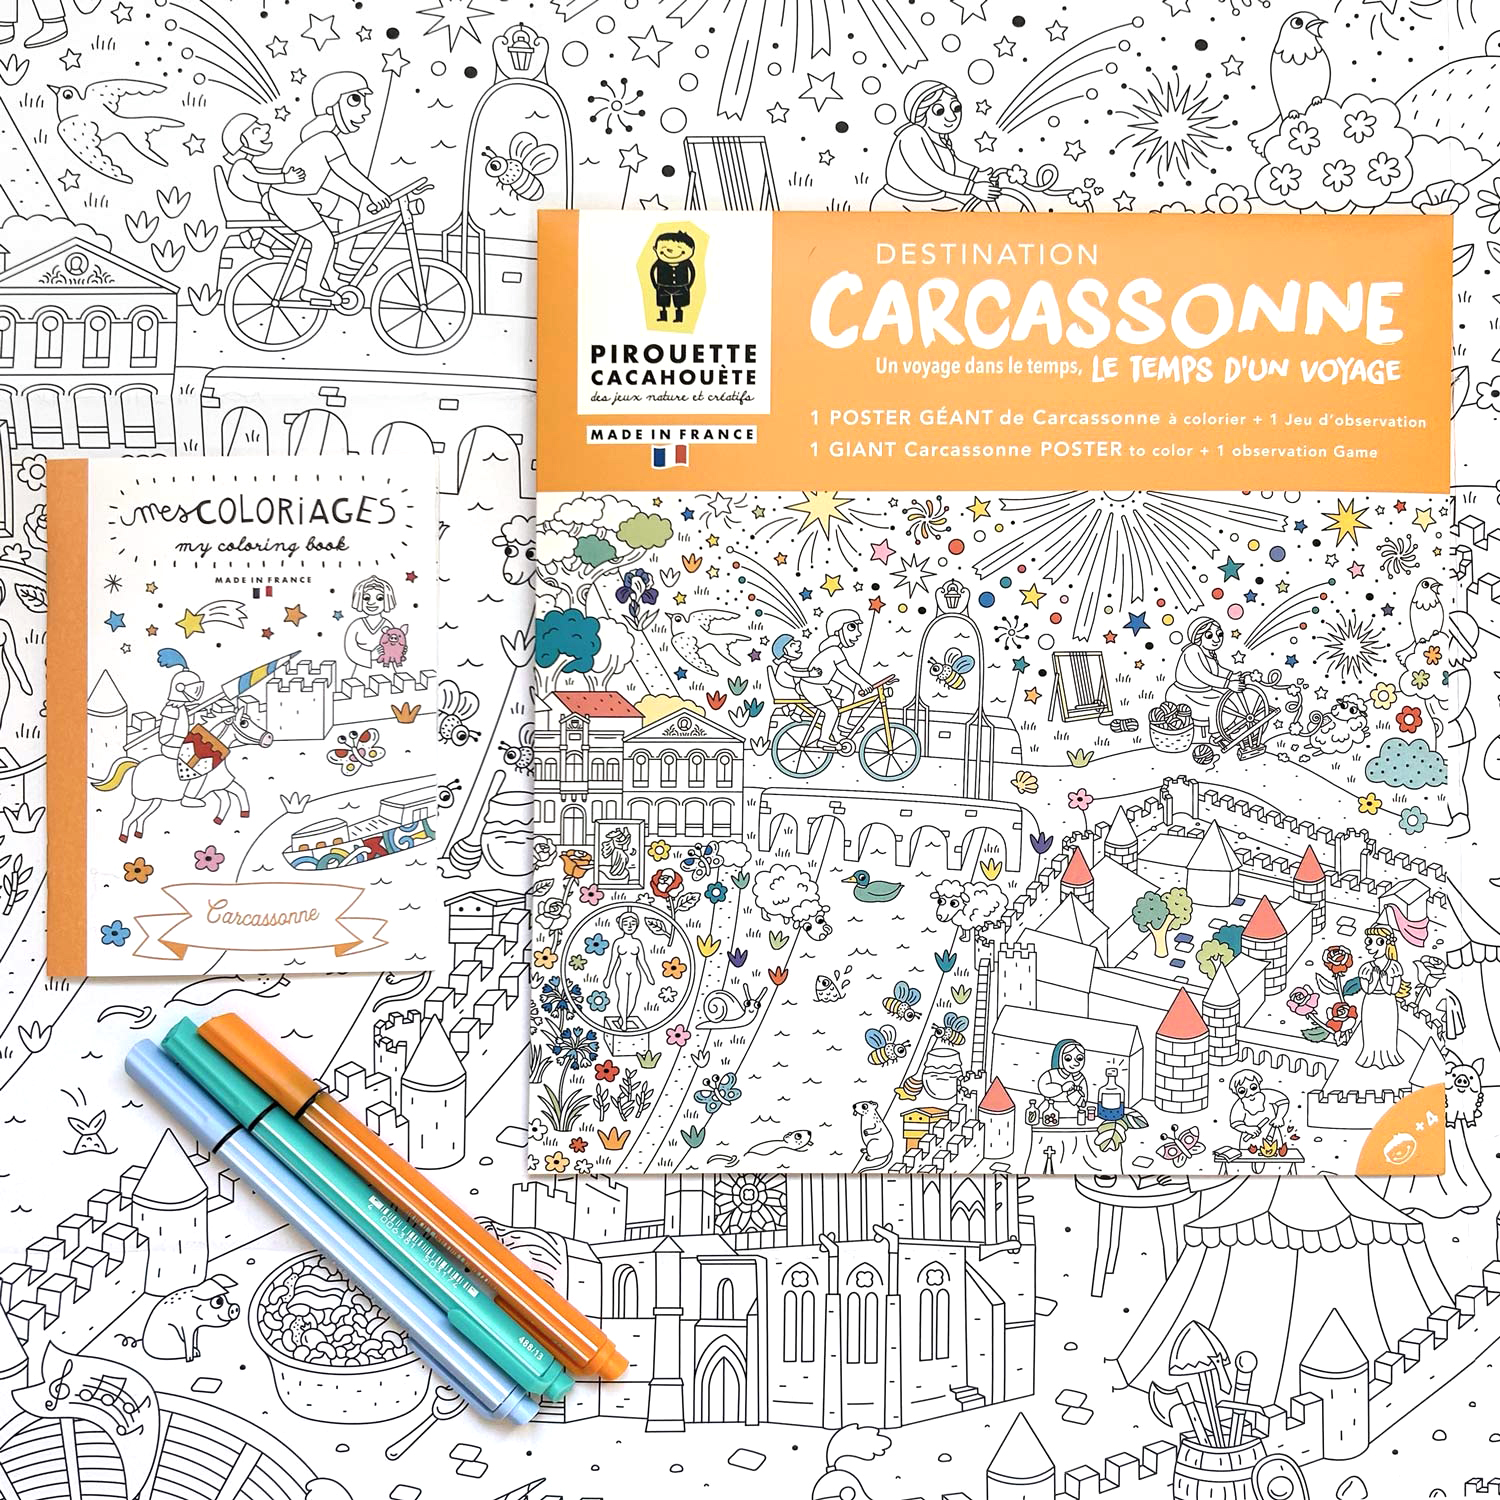 Partnership with the city of Carcassonne